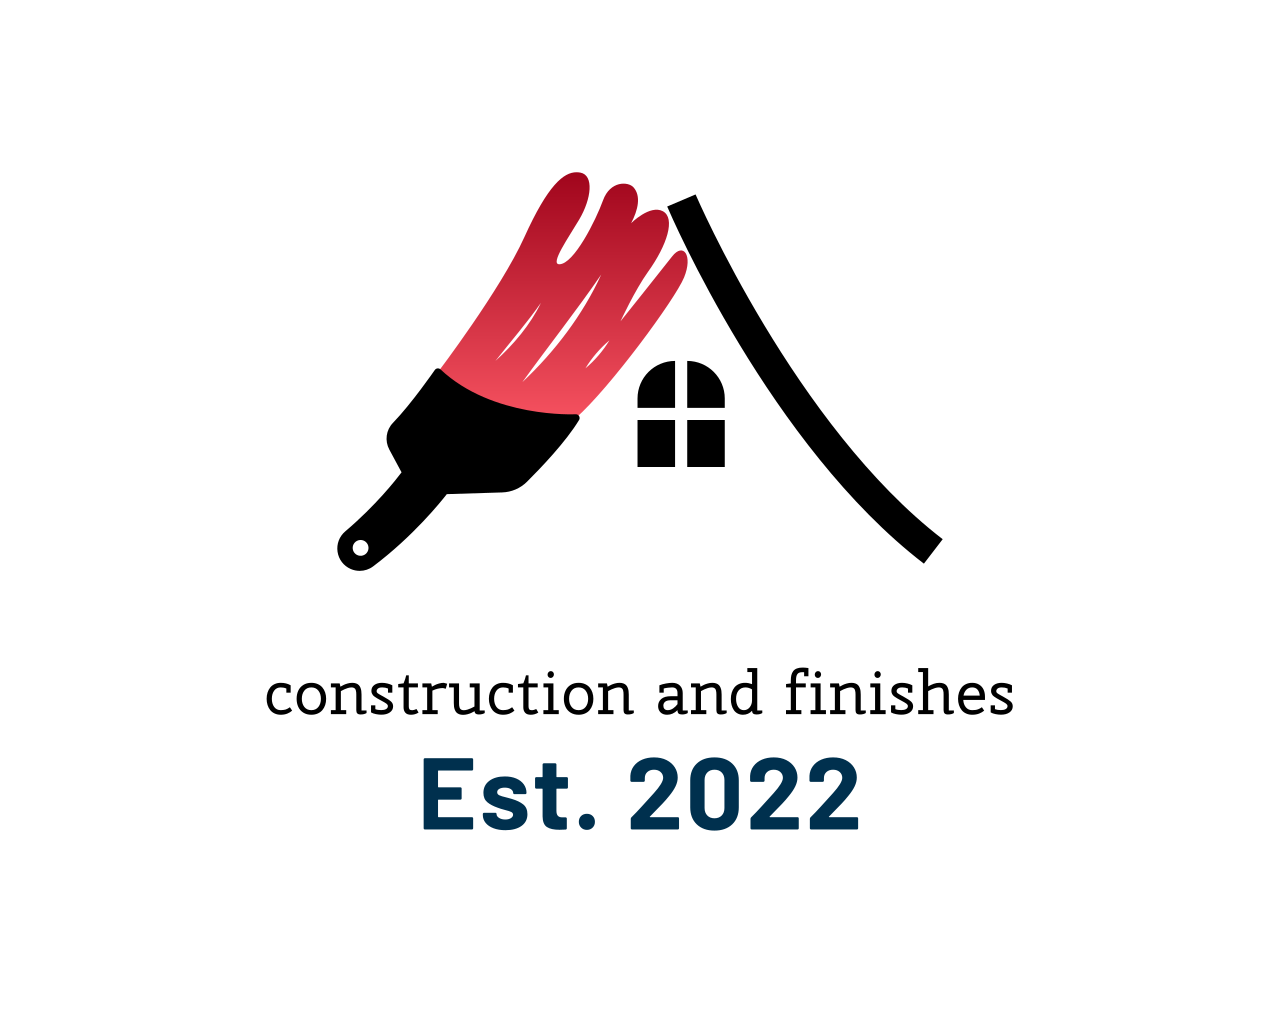 construction and finishes's web page